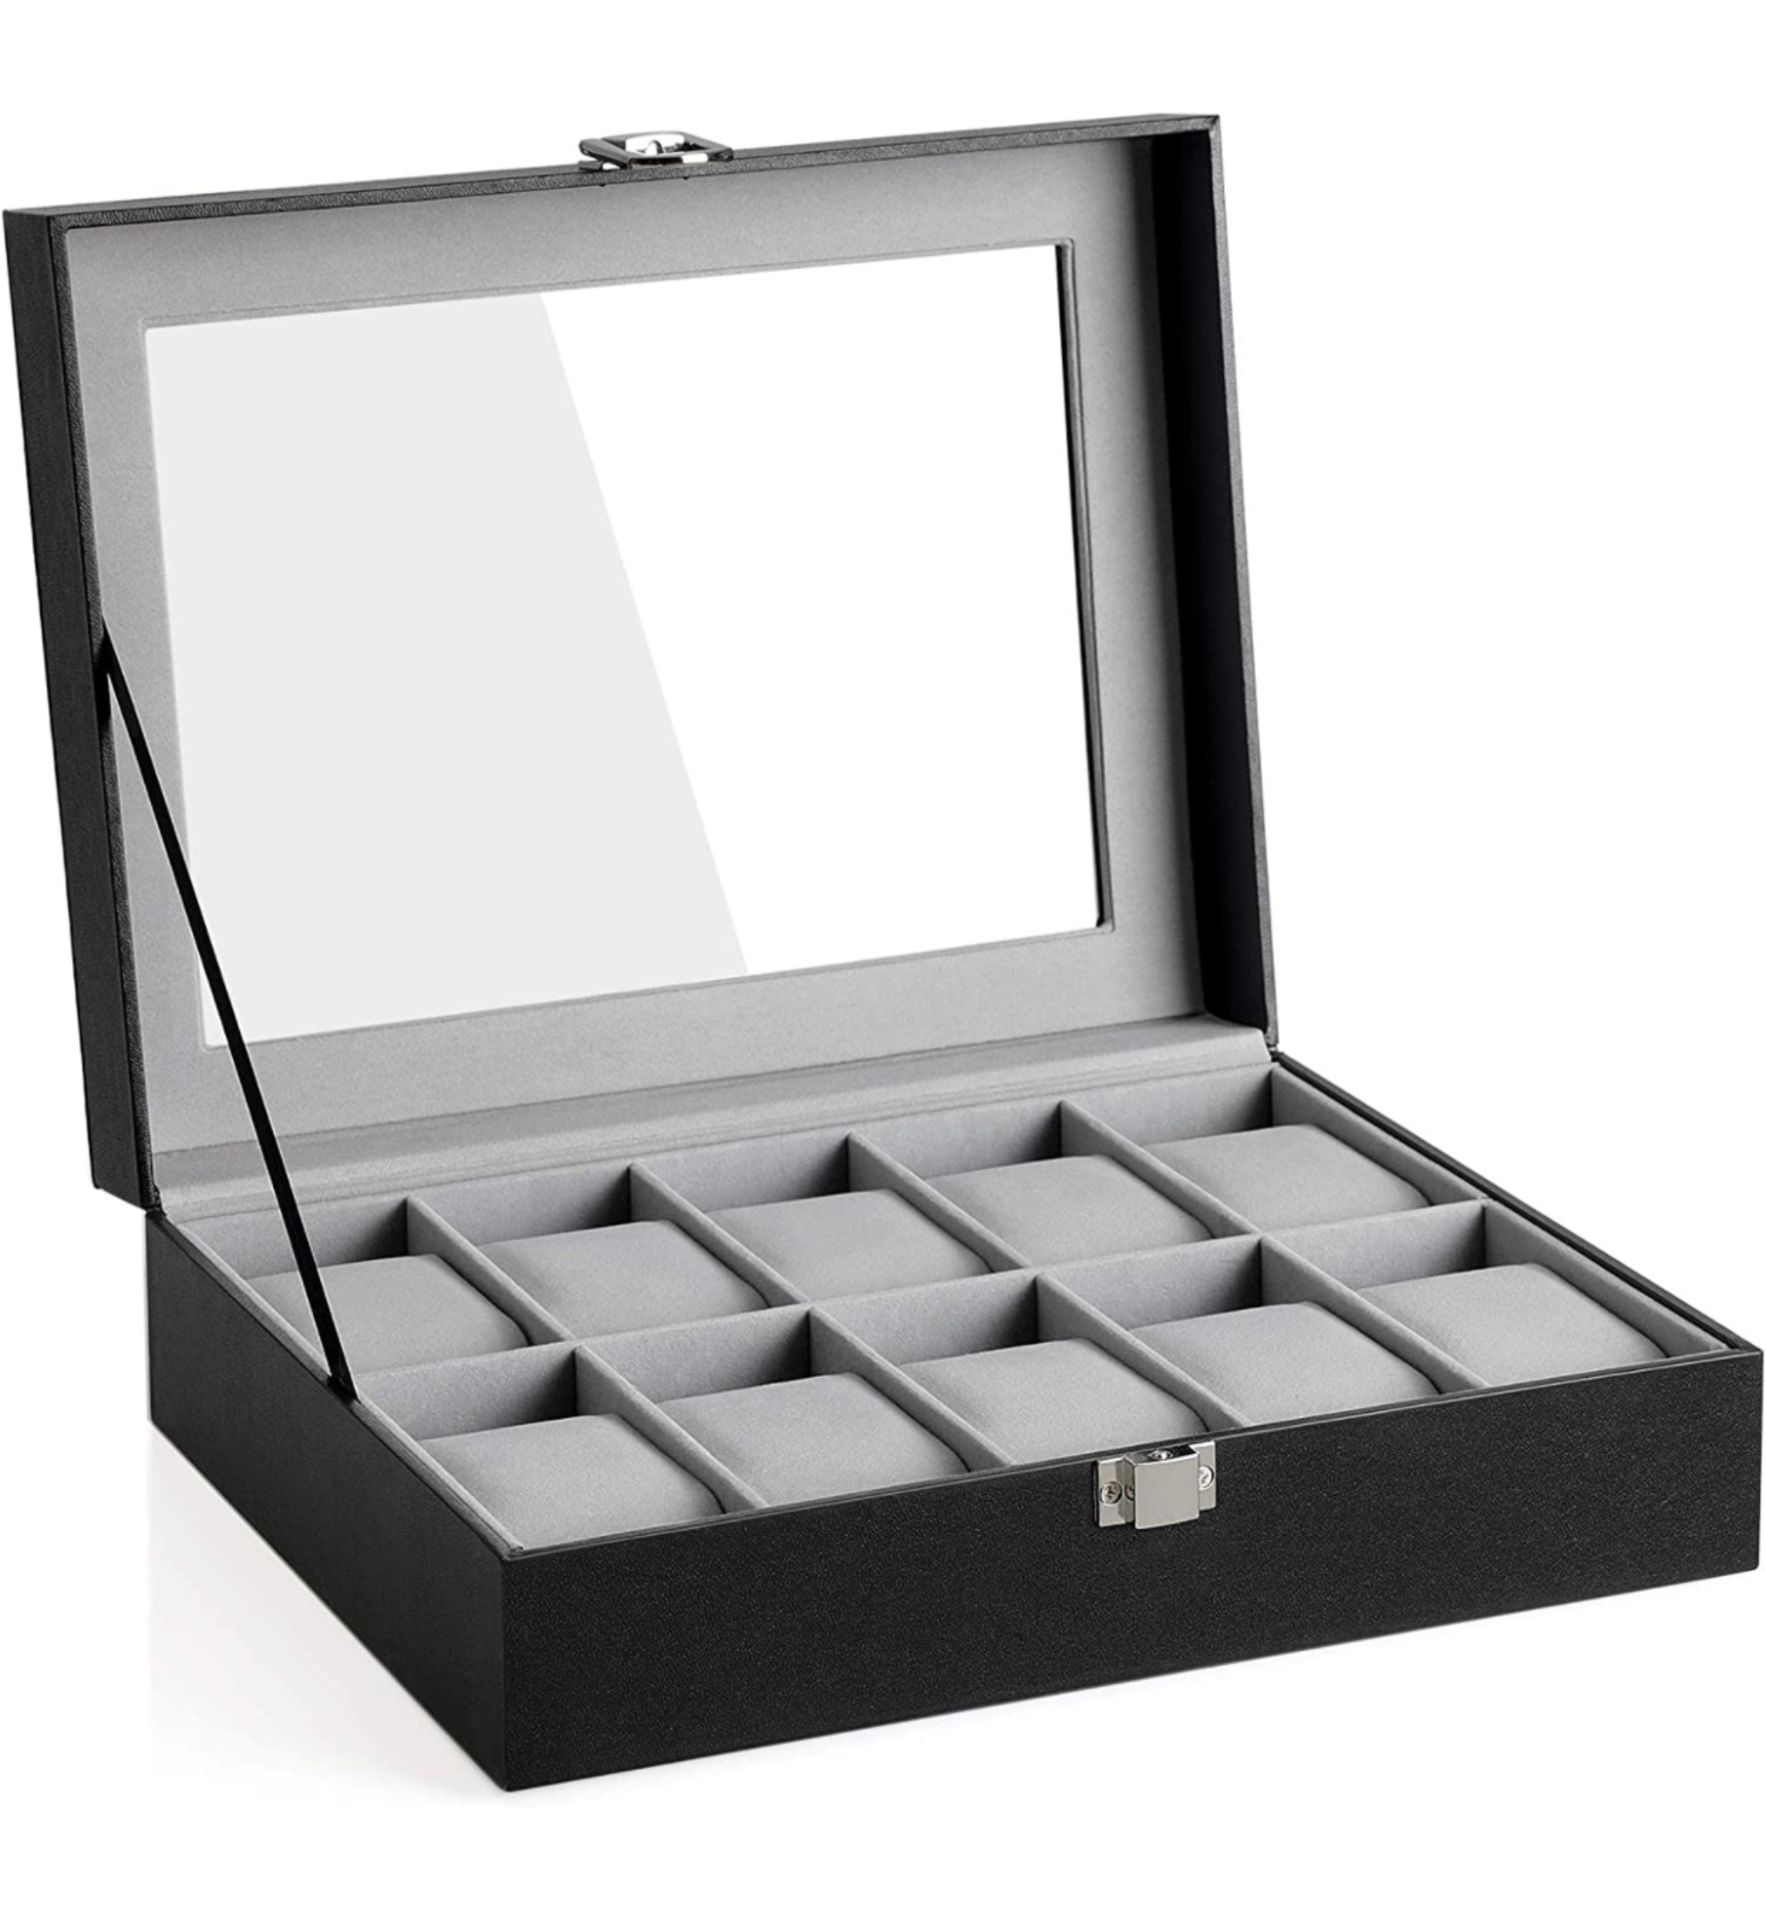 Songmics Glass Lid Watch Box with 10 Compartments, Grey